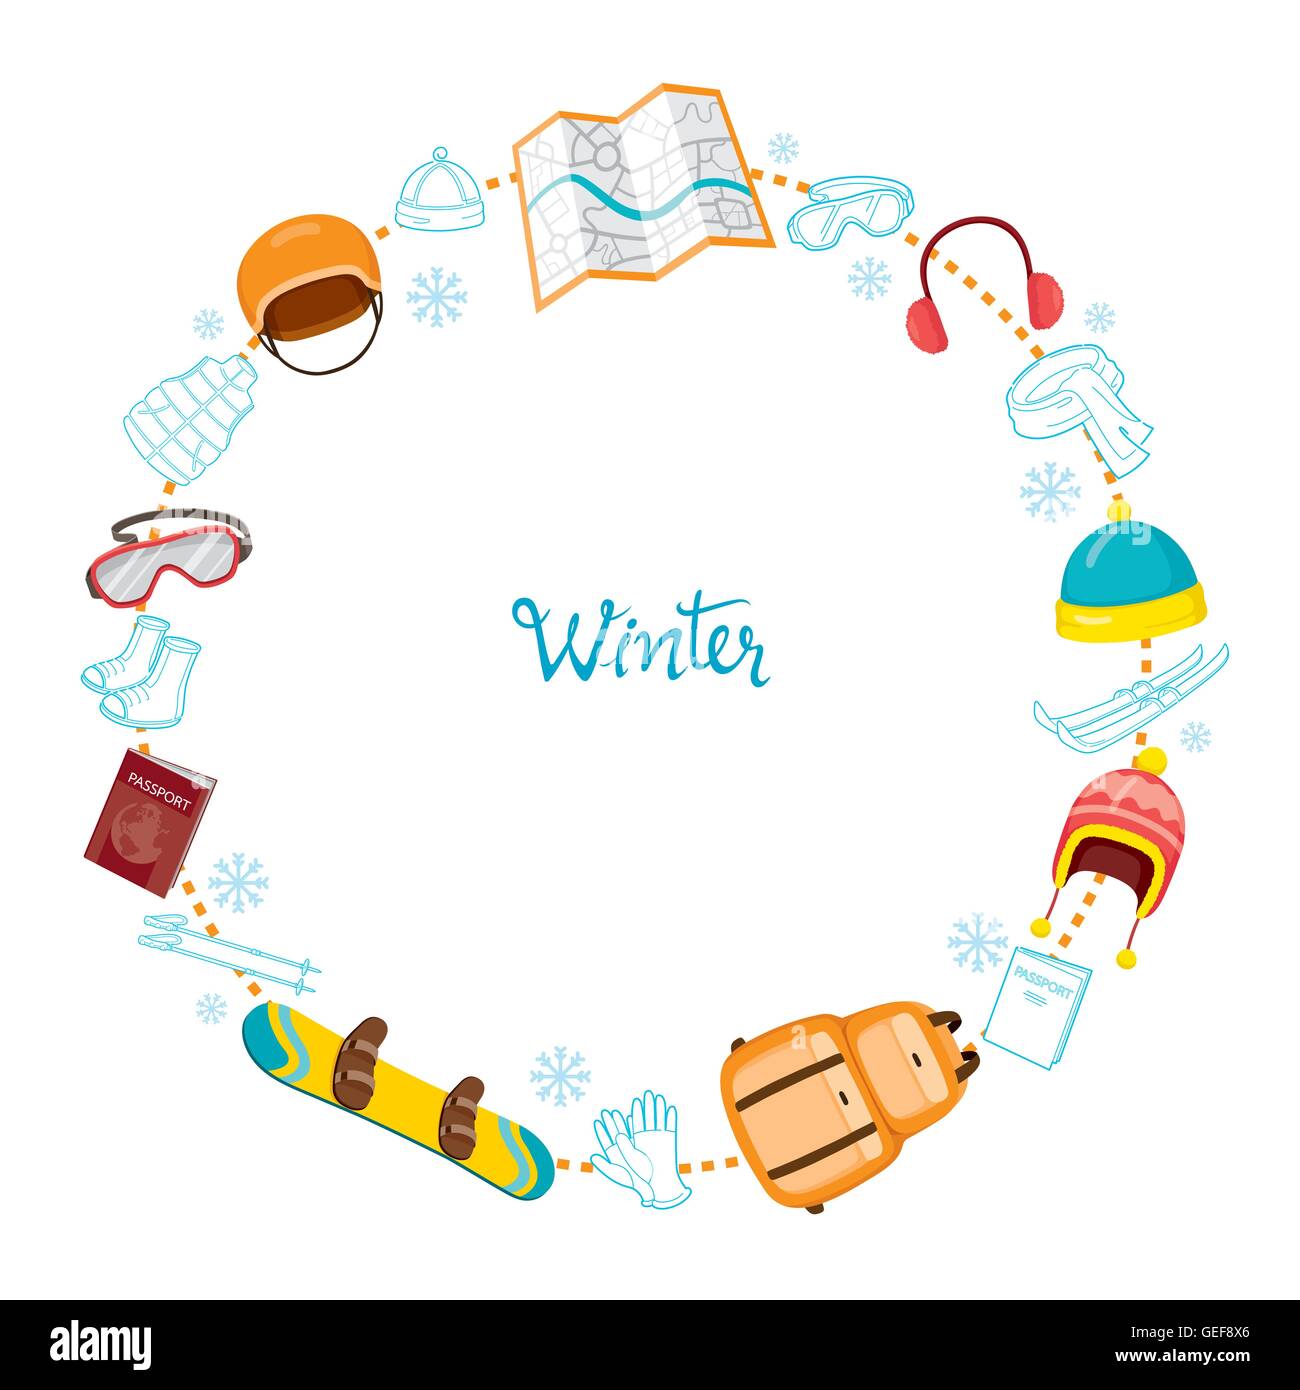 Winter Equipment Icons On Round Frame Set, Season, Vacation, holiday, Object, Activity, Travel Stock Vector